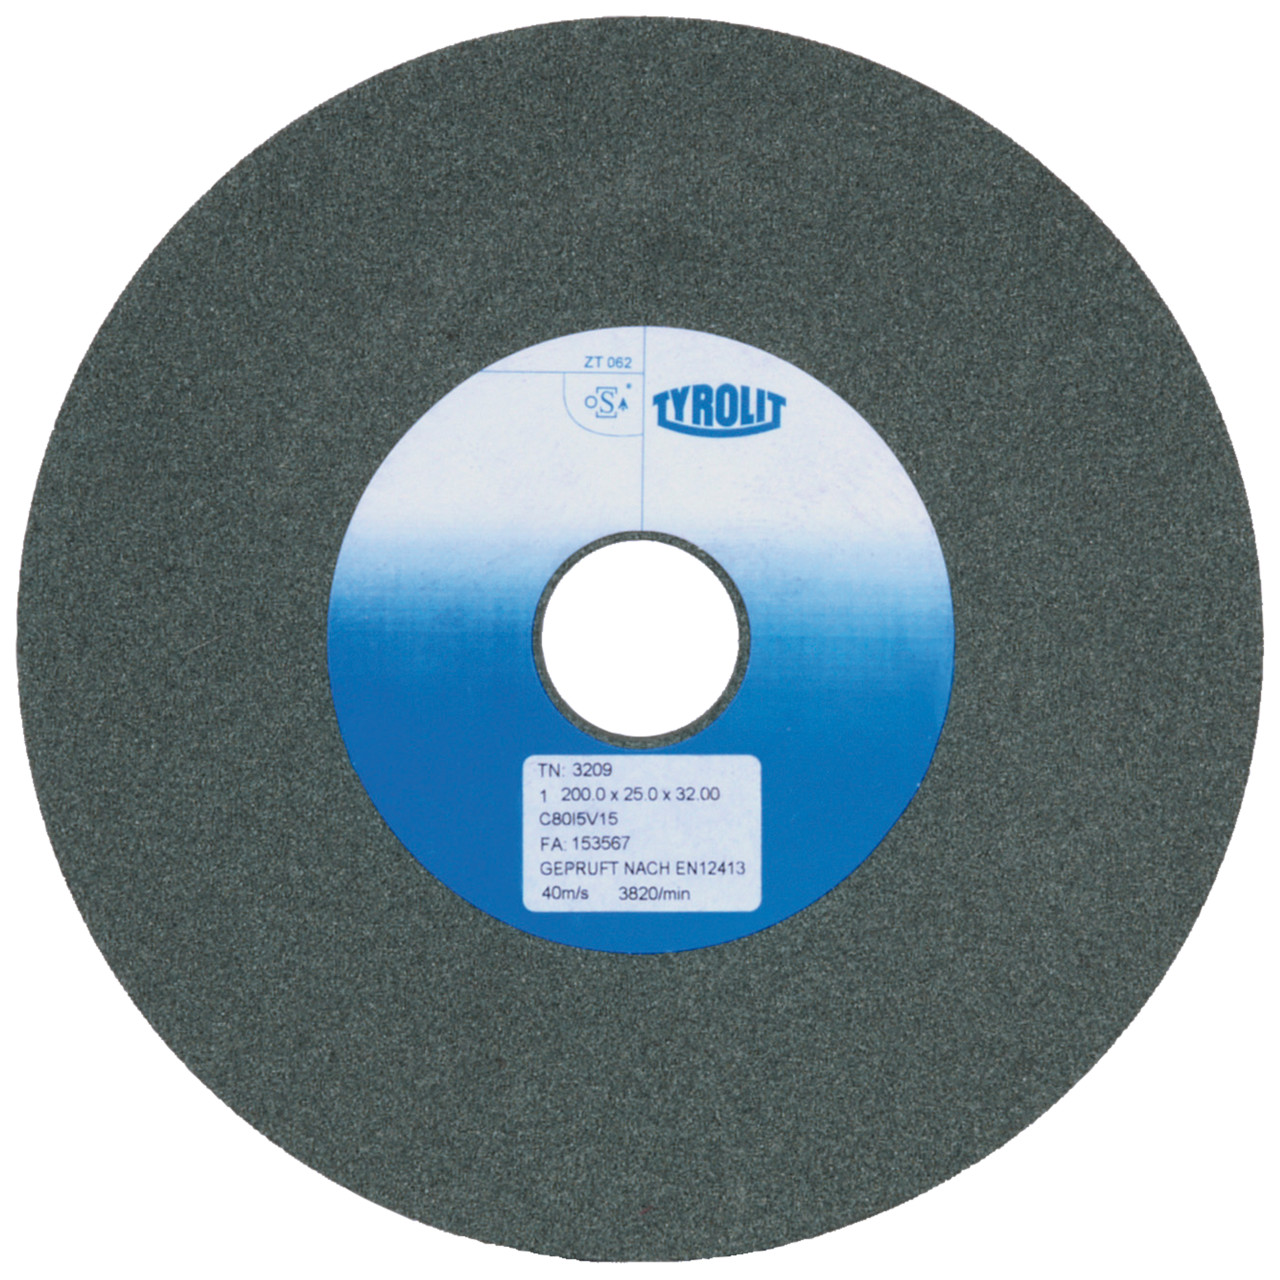 Tyrolit Conventional ceramic grinding discs DxDxH 350x32x127 For carbide and cast iron, shape: 1, Art. 28584